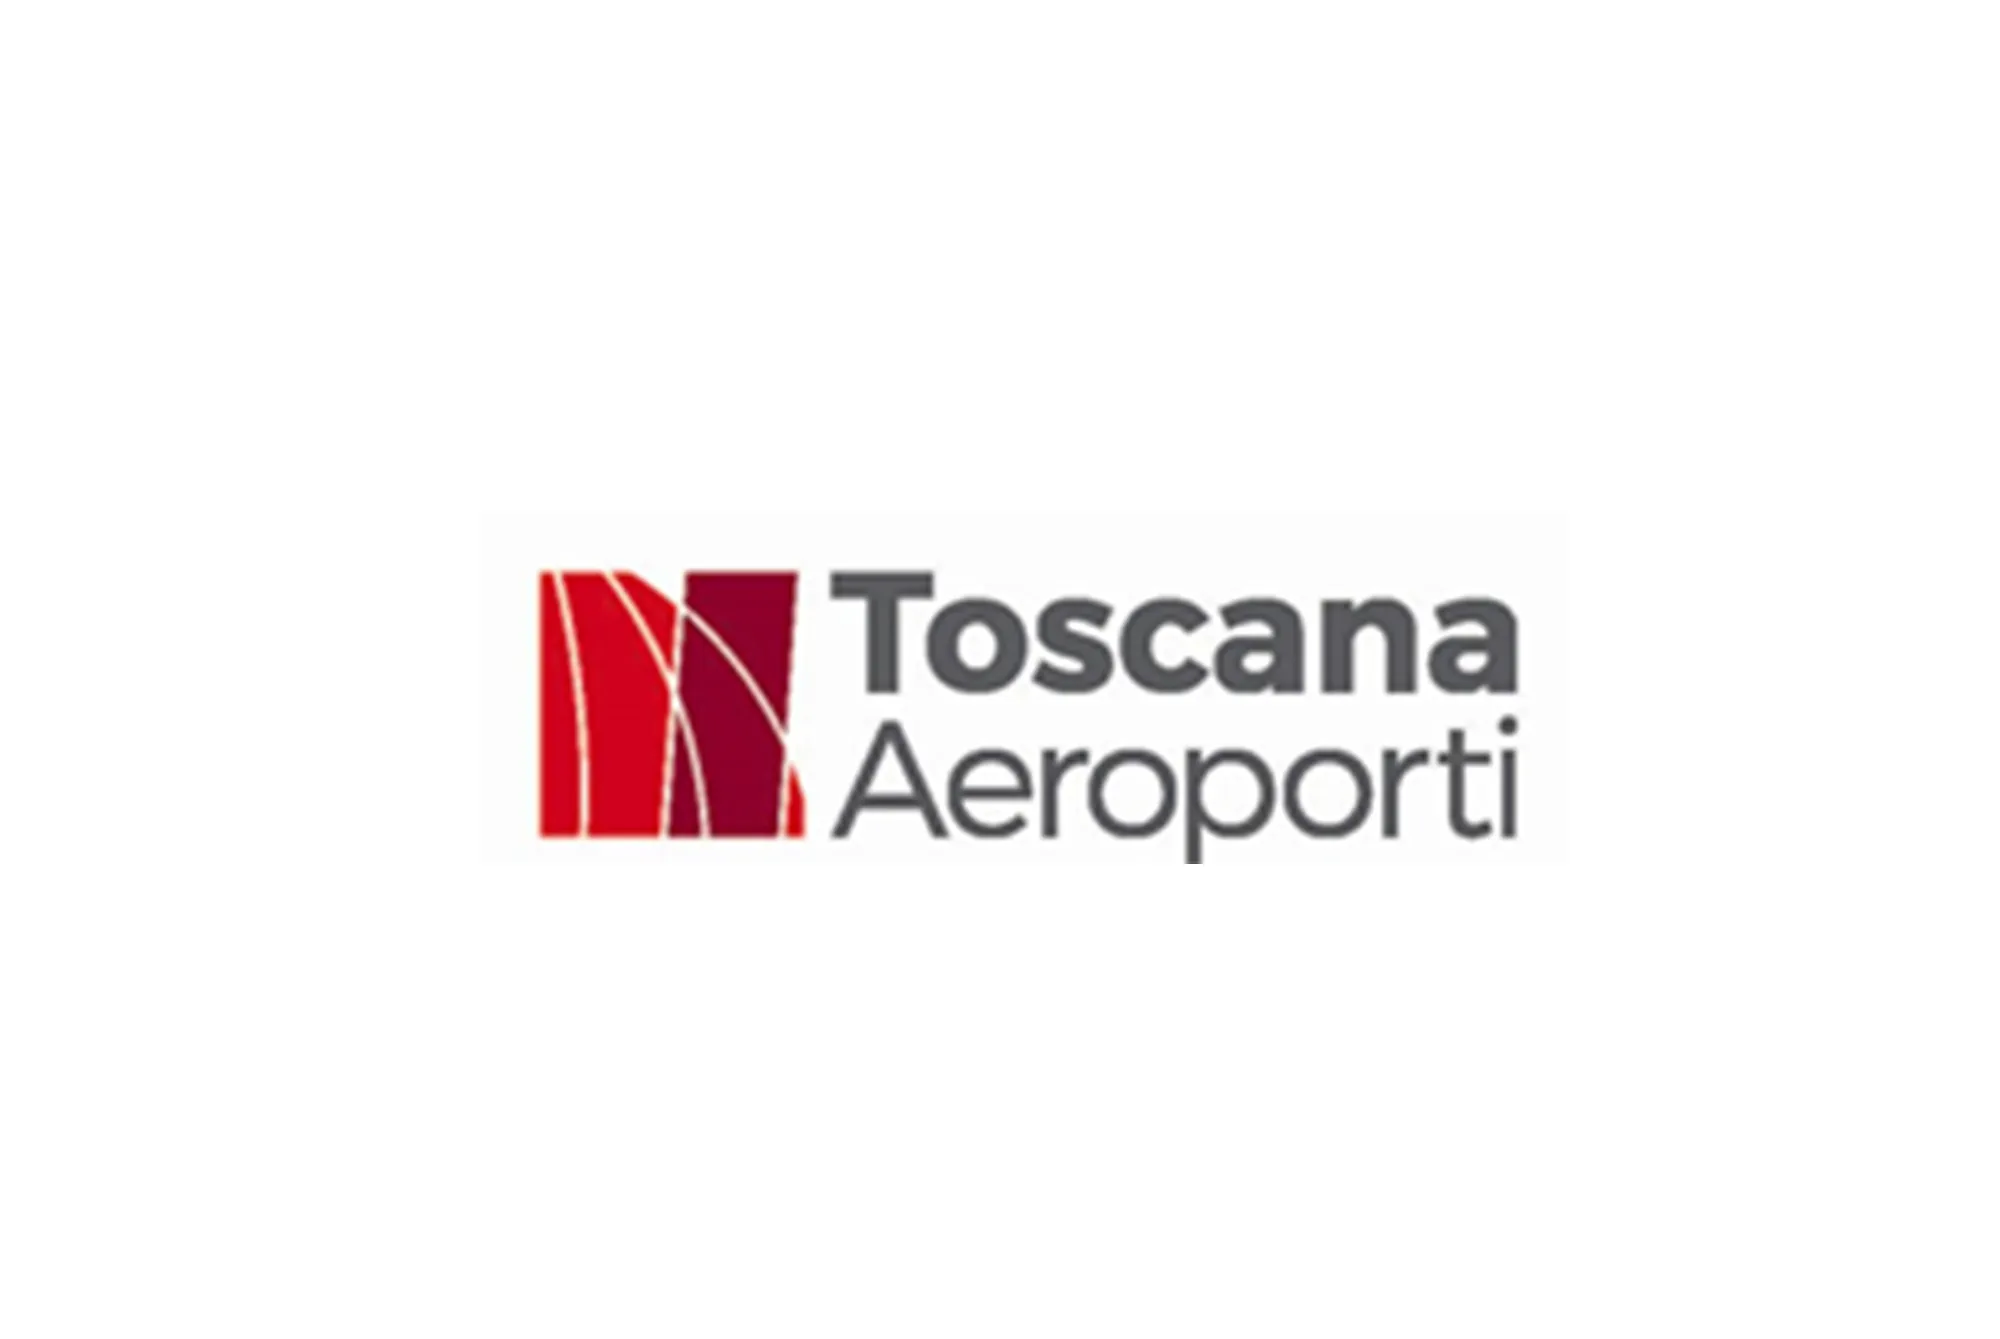 Toscana Aeroporti P2 Sosta Lunga (Paga online) - Florence Airport Parking - picture 1